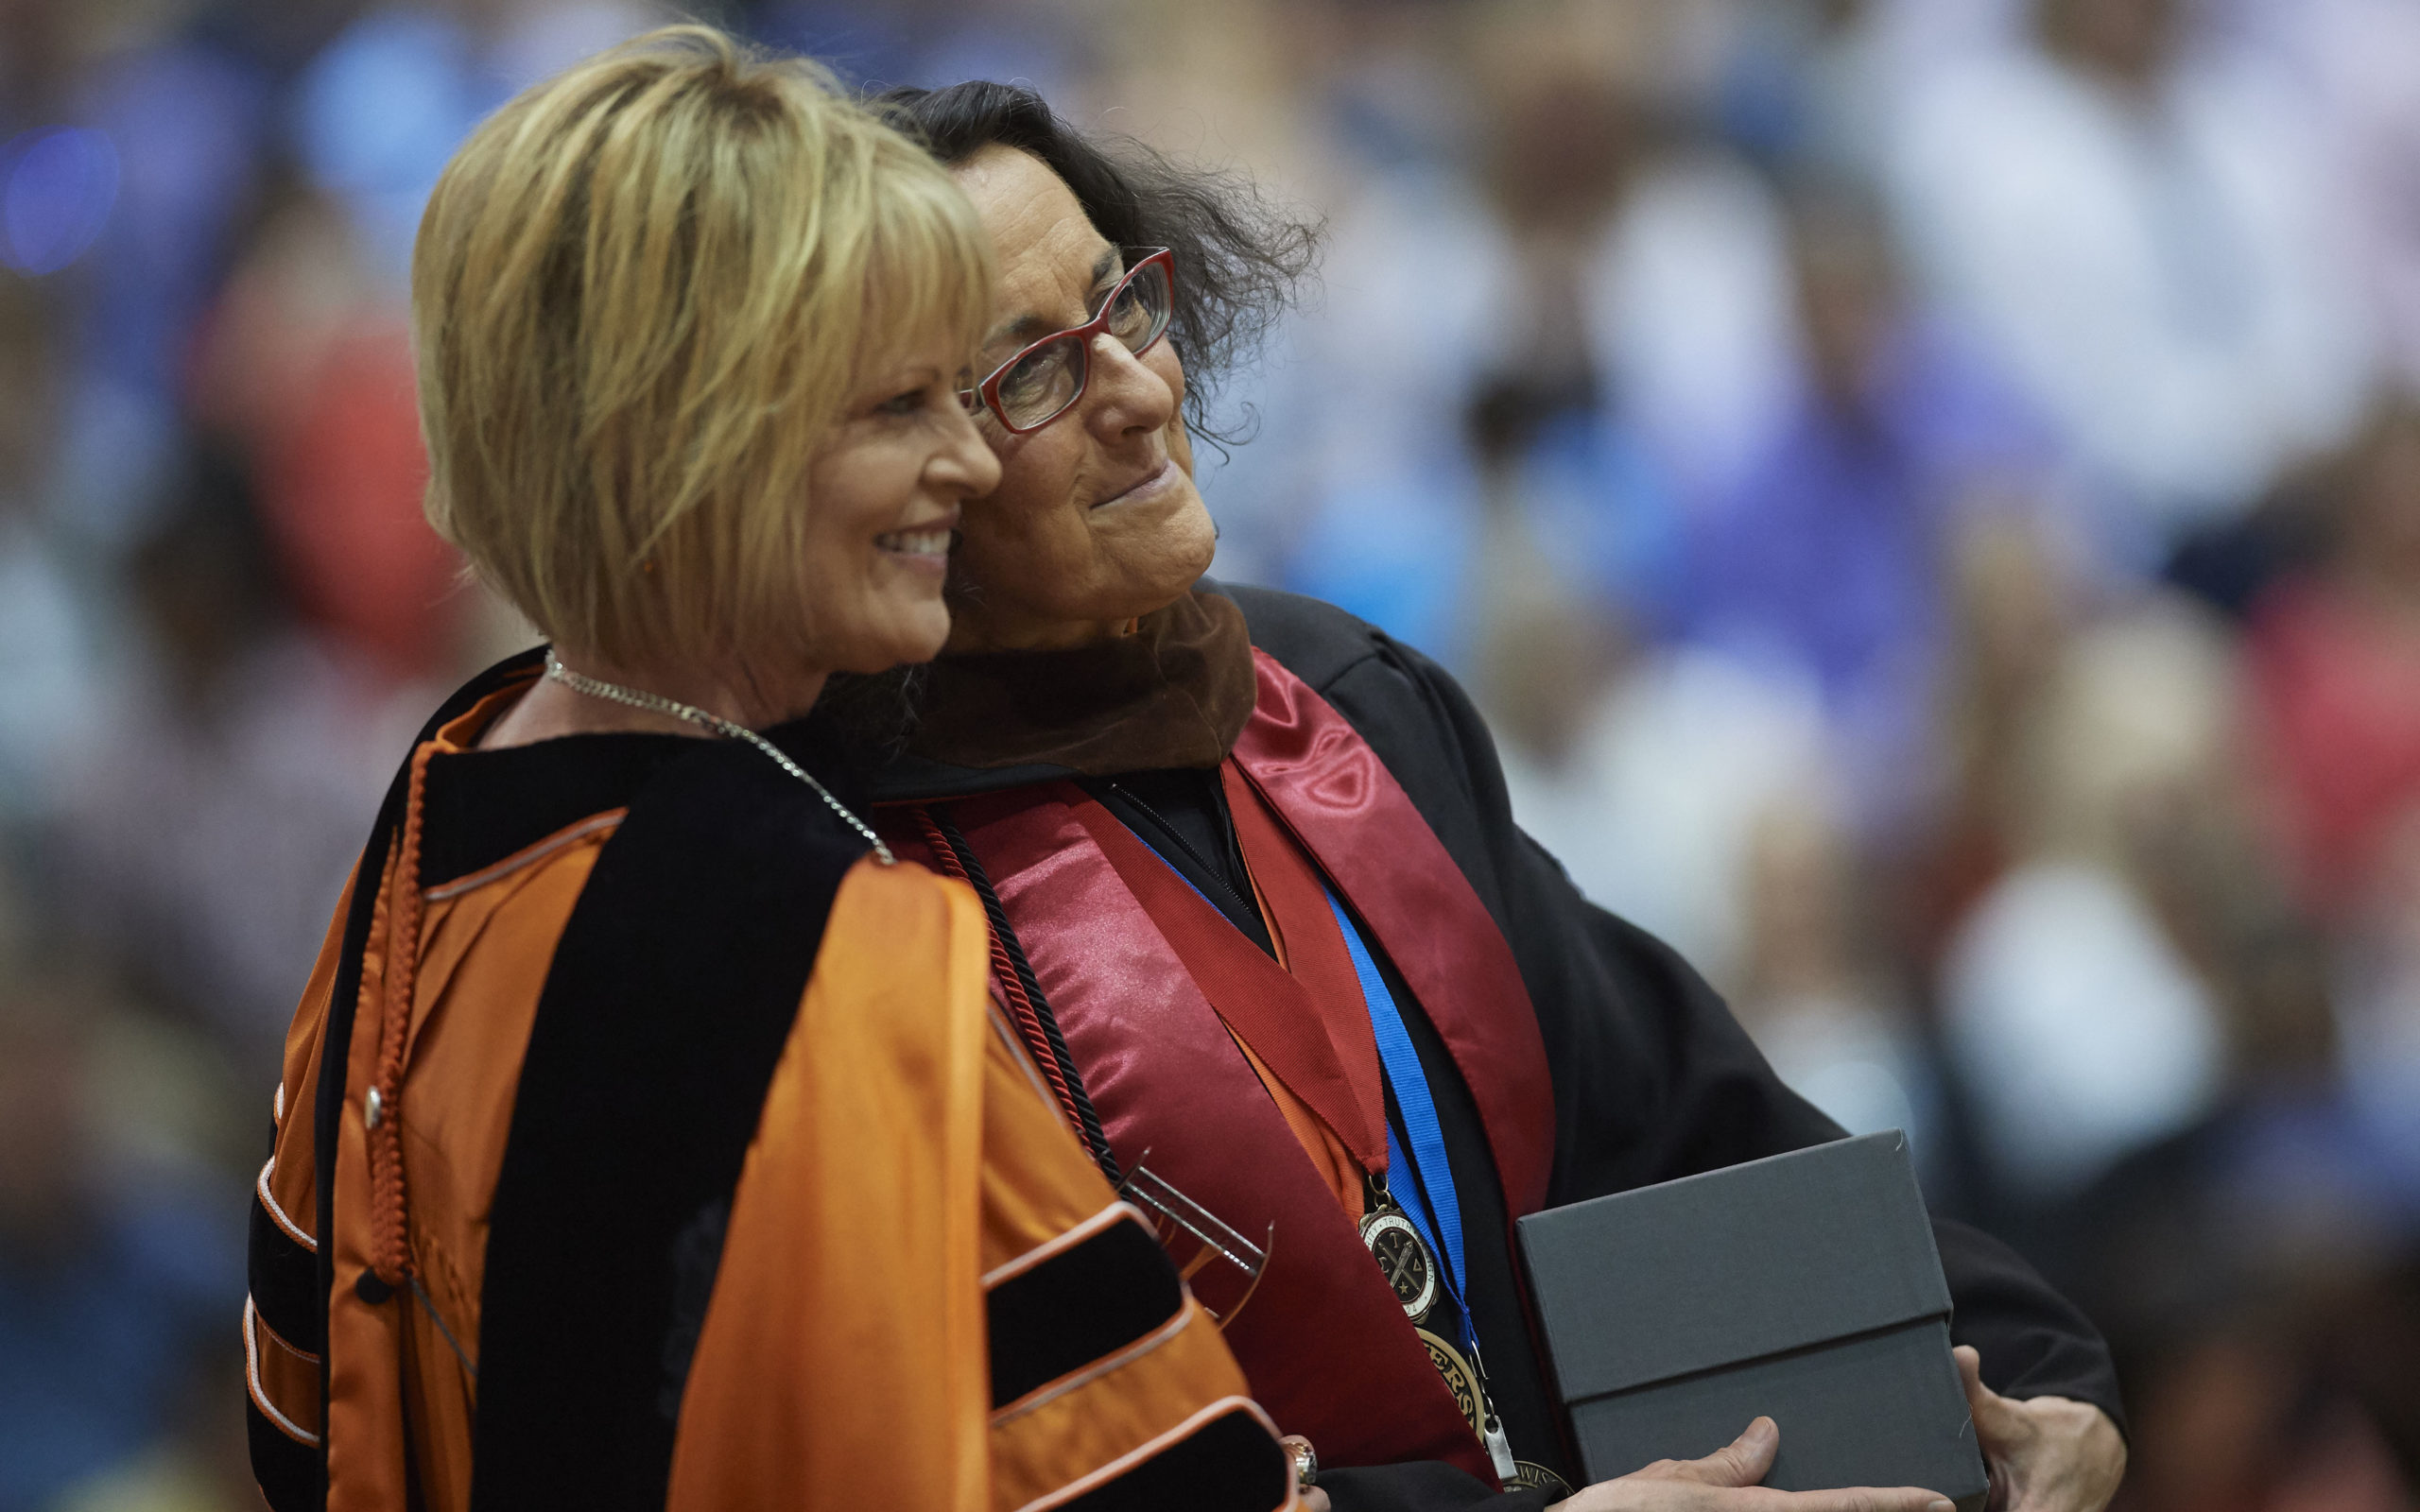 Professor Marti Mihalyi with Dr. Lynne Murray at commencement ceremony